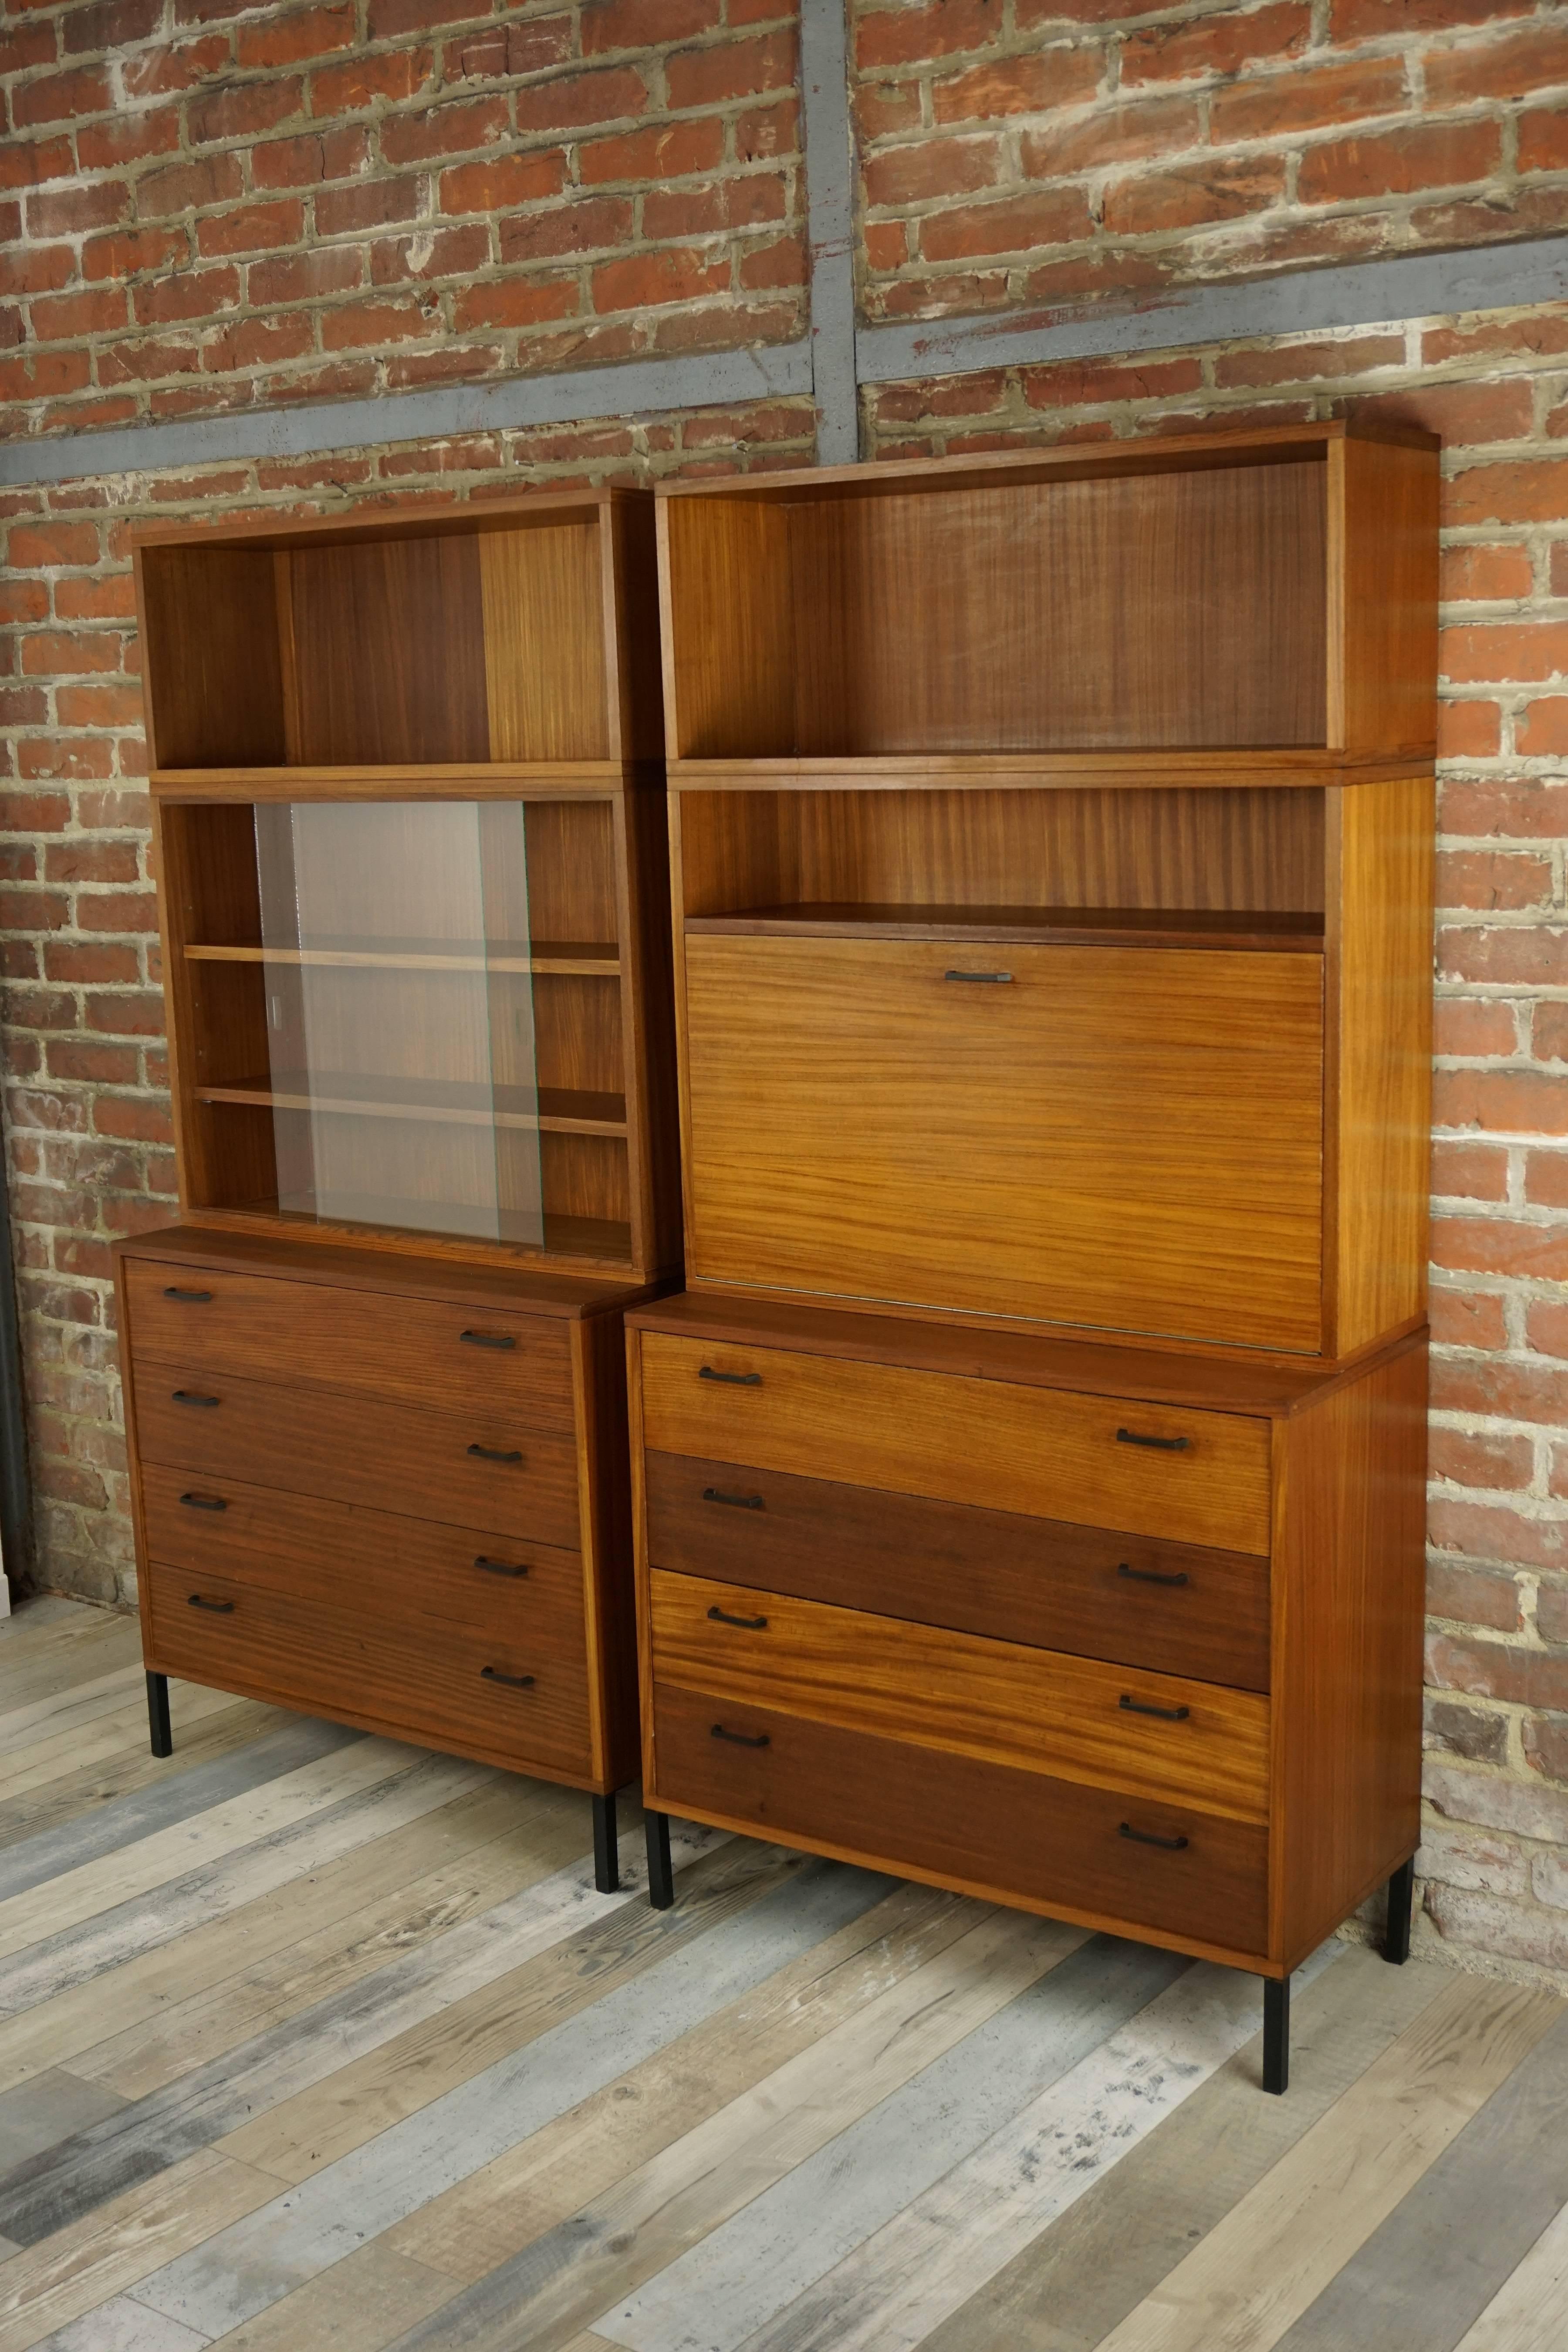 Wooden Teak Metal and Glass Modular Wall Unit From the 1950s 1